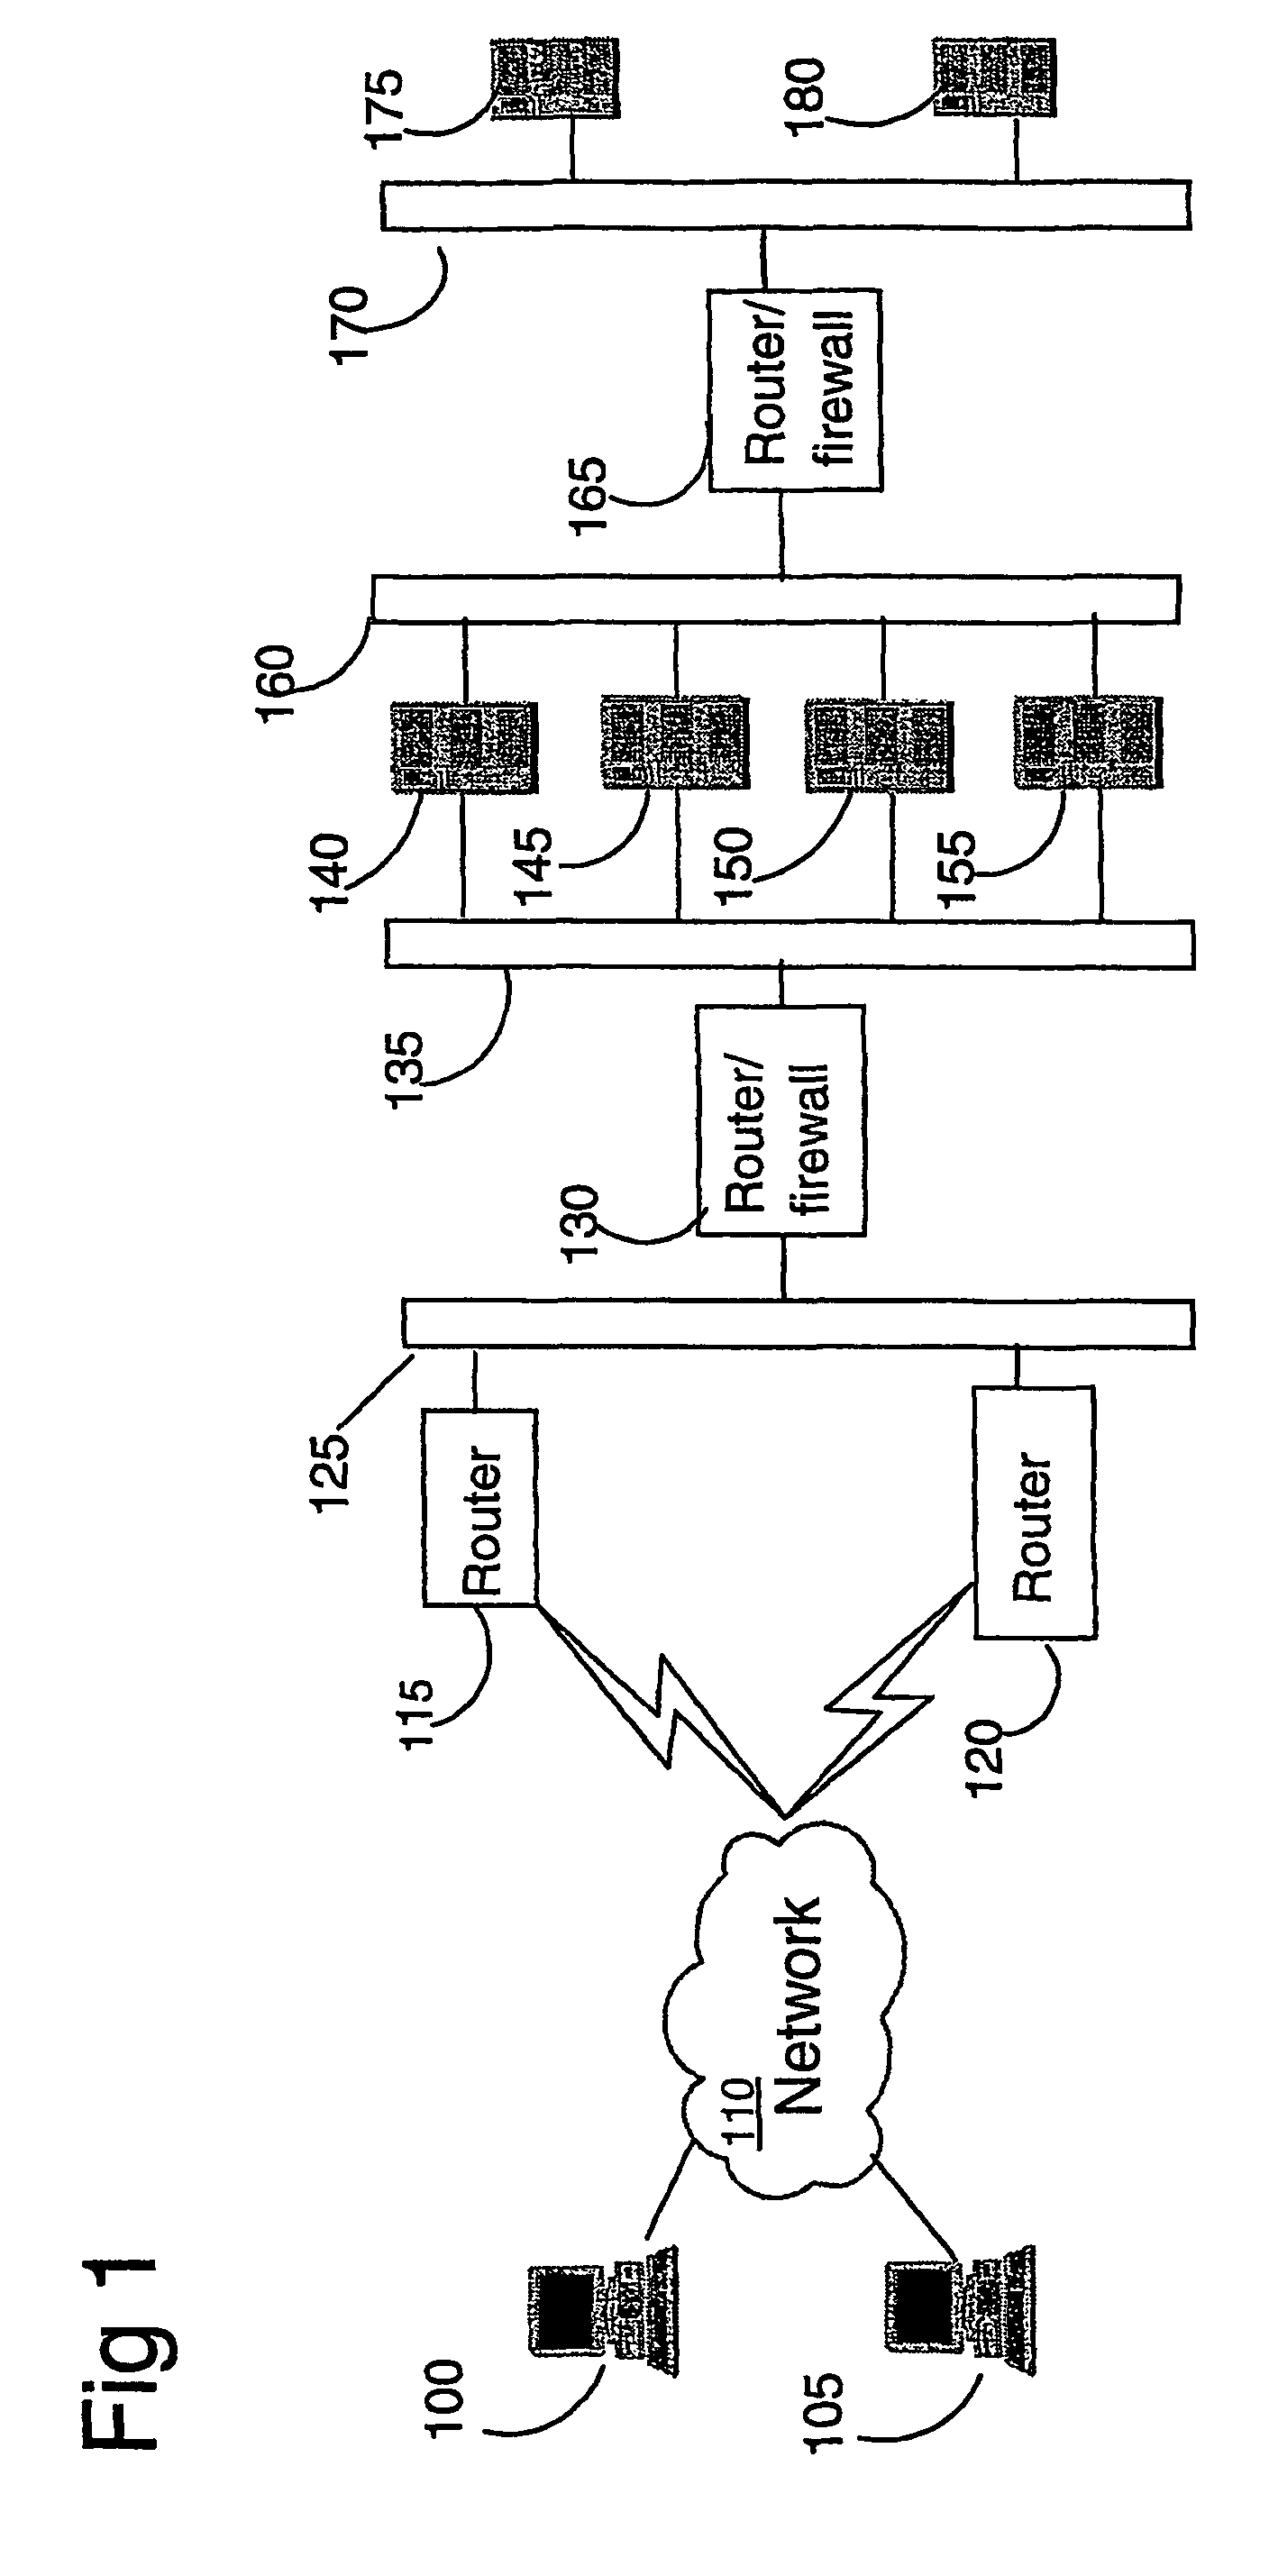 Remote dynamic configuration of a web server to facilitate capacity on demand